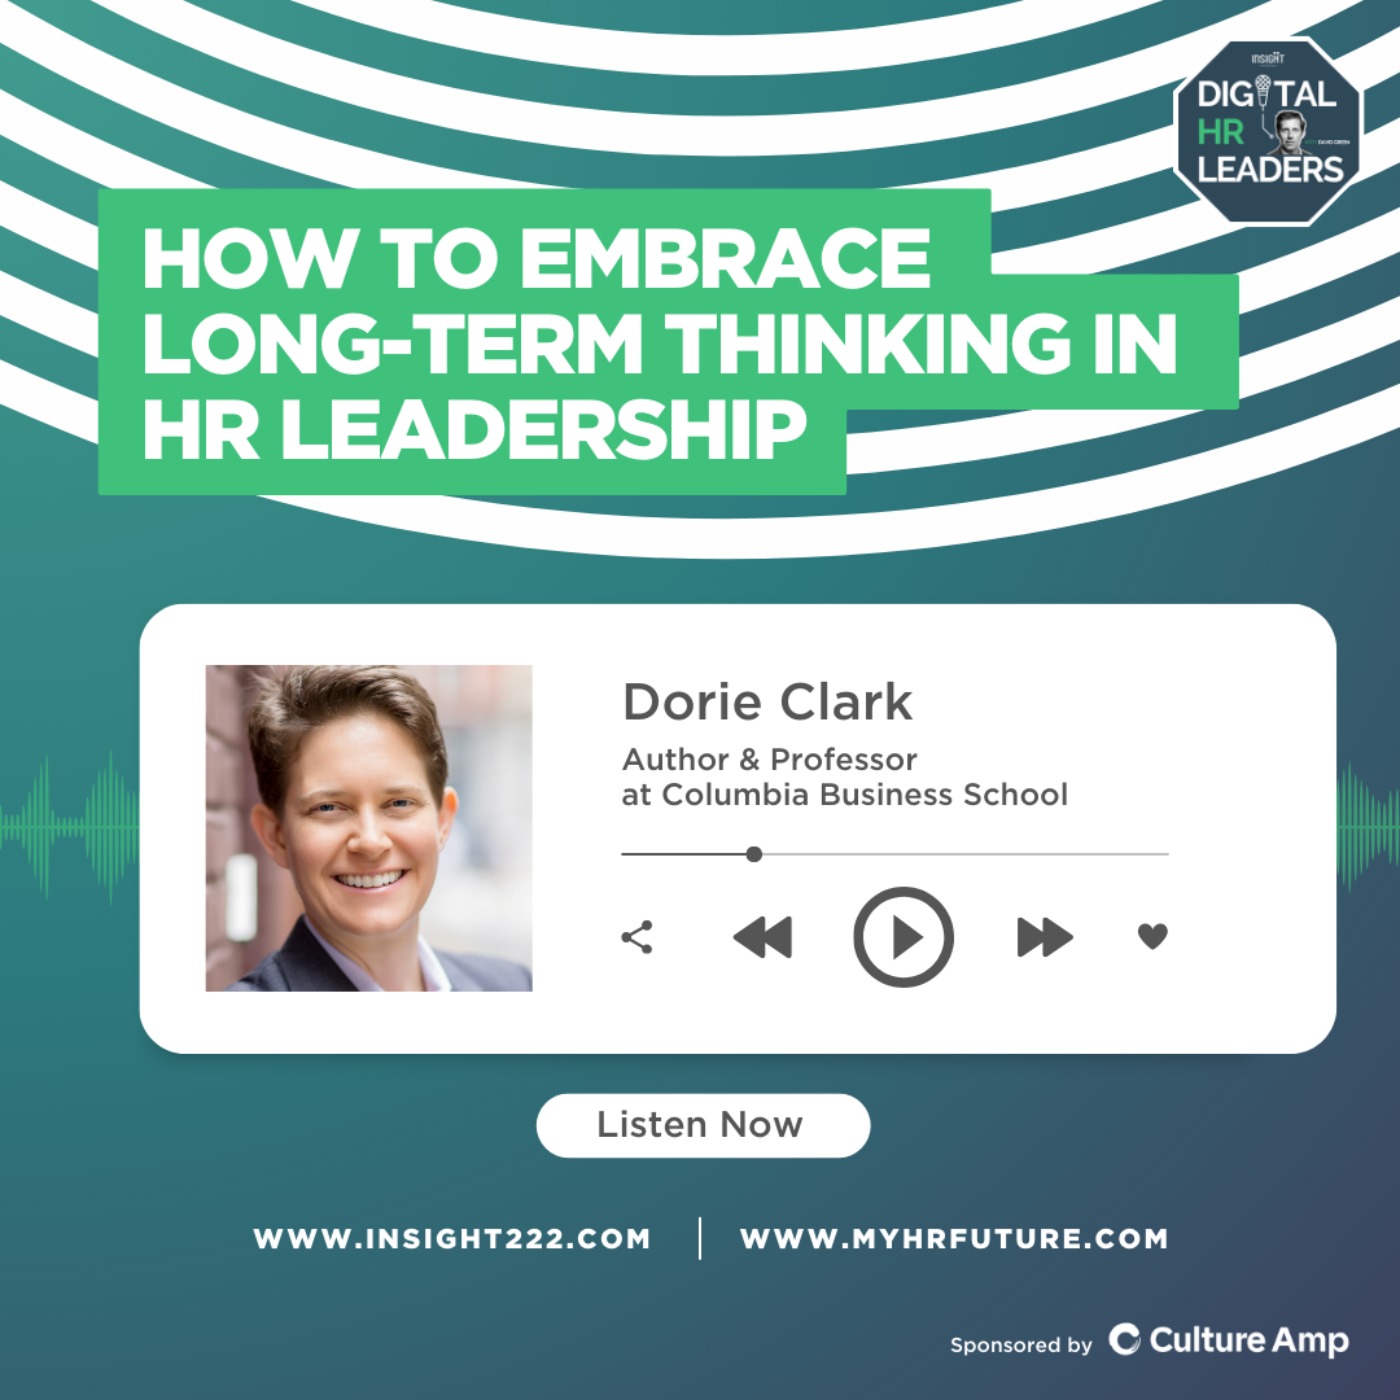 How to Embrace Long-Term Thinking in HR Leadership (an Interview with Dorie Clark)